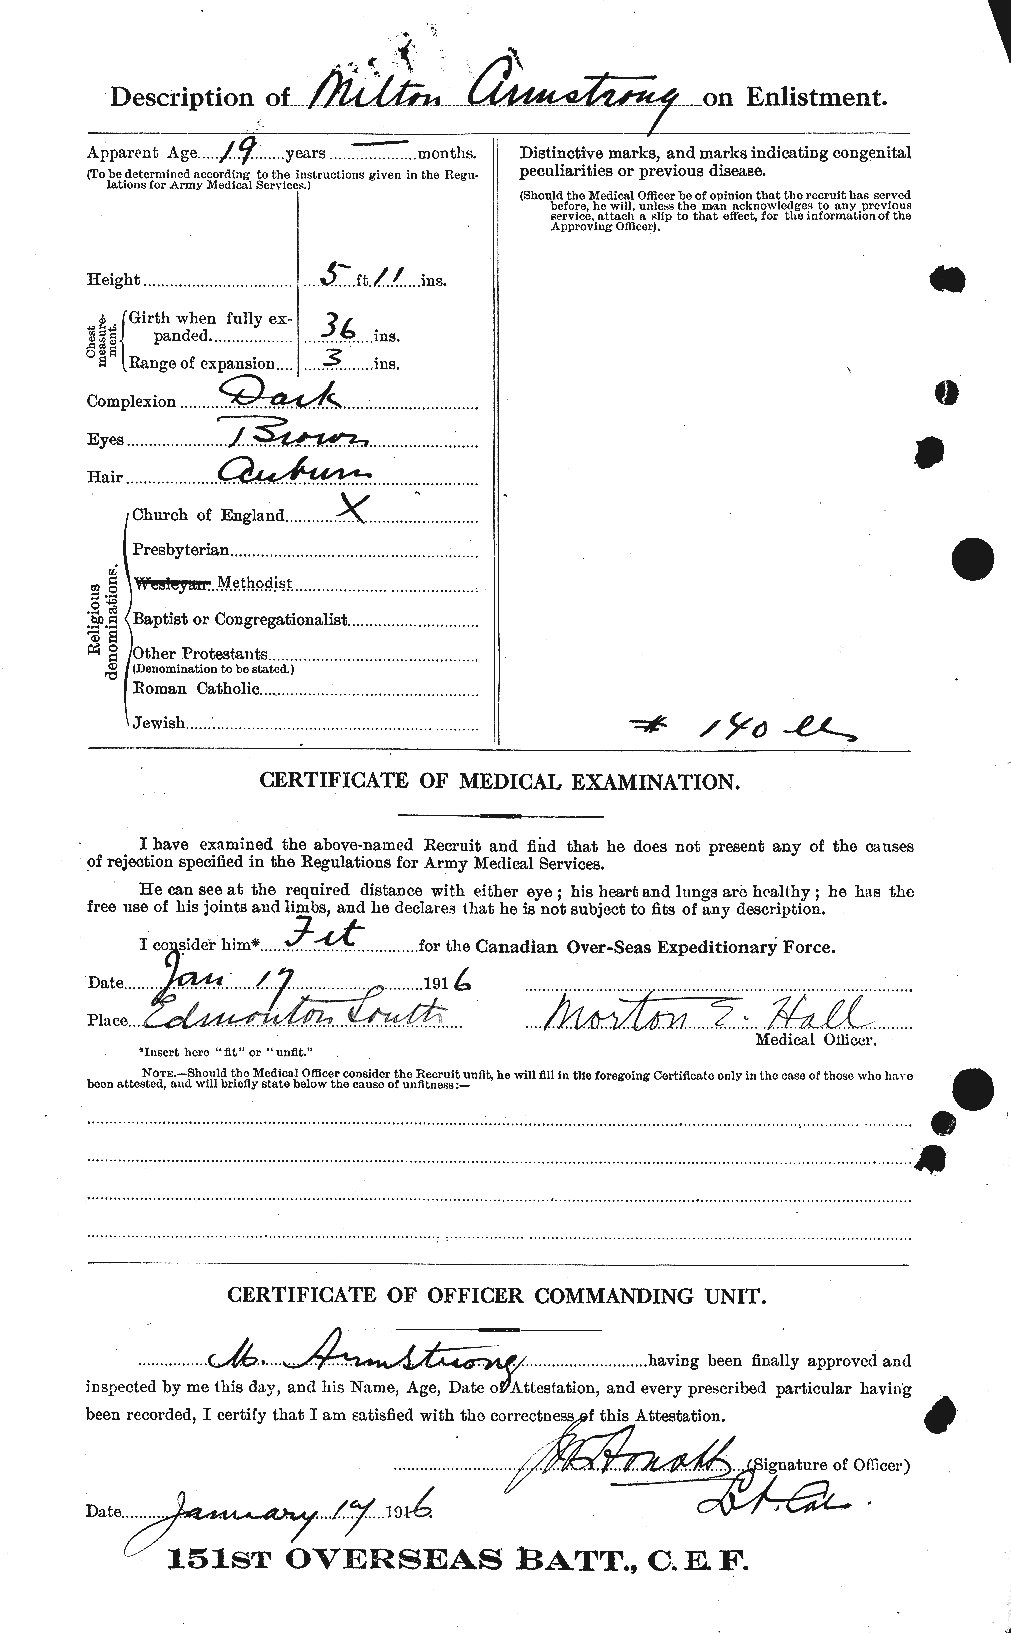 Personnel Records of the First World War - CEF 212749b